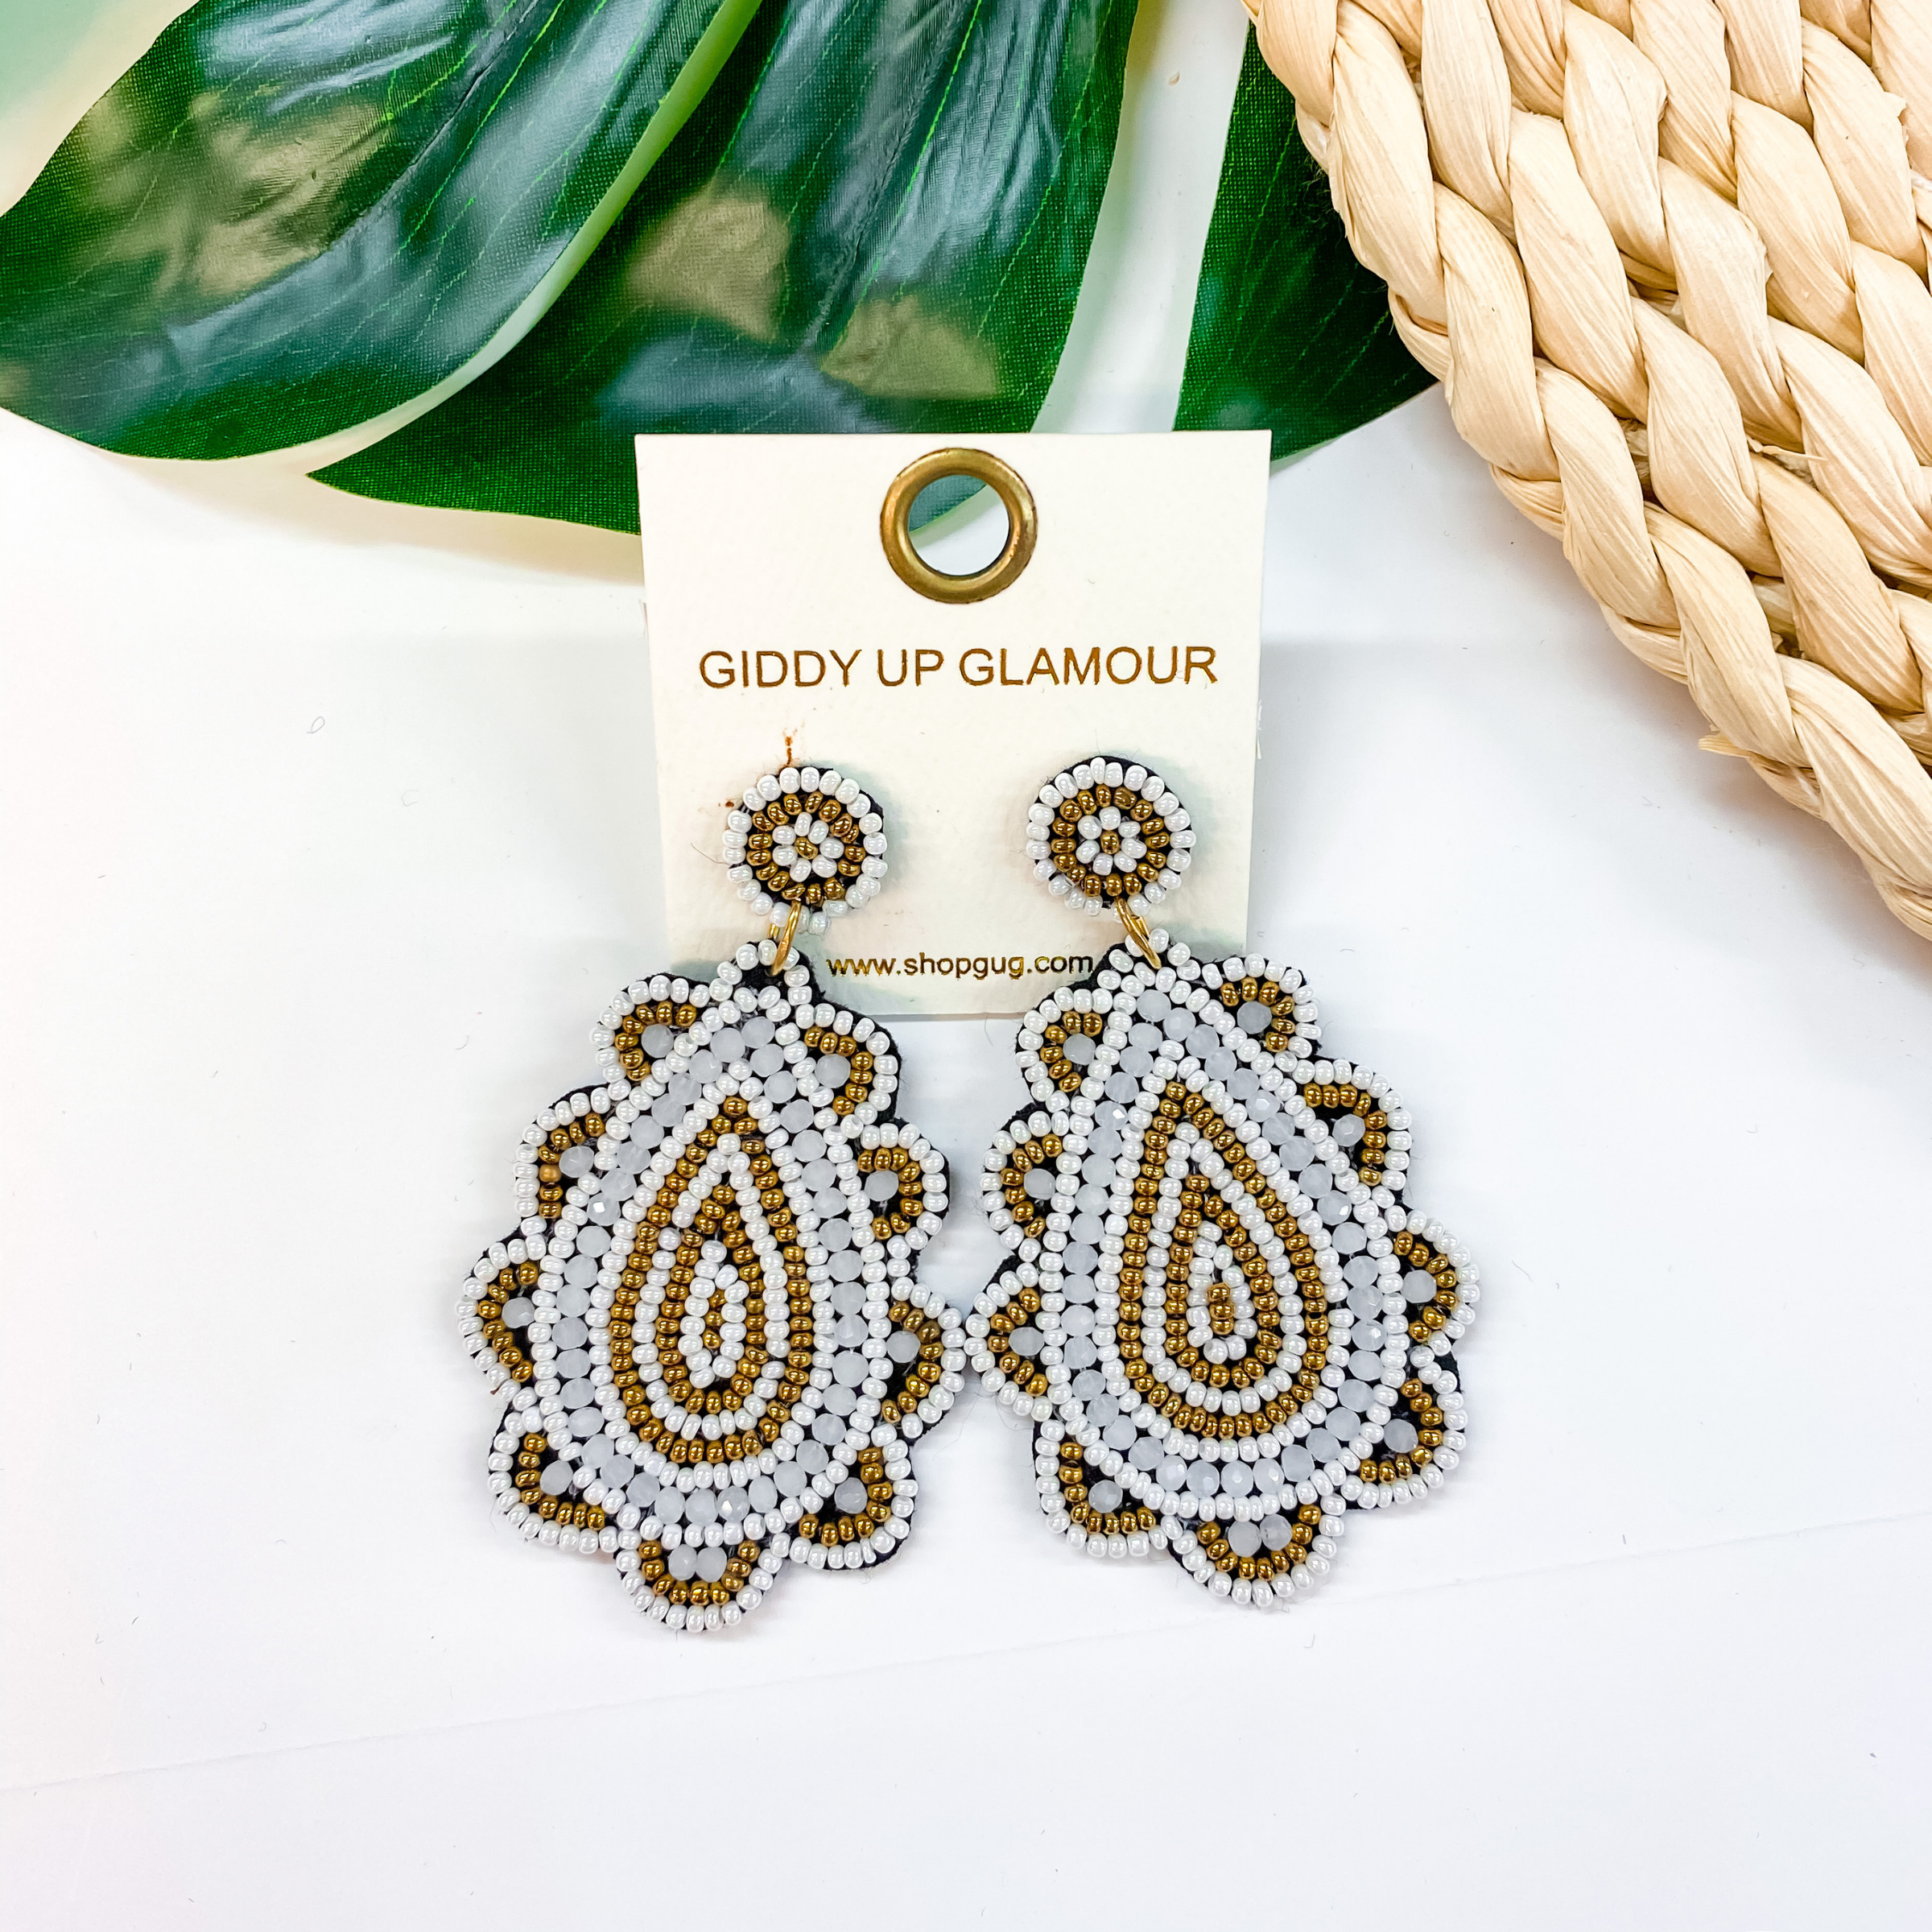 Light Up The Night Seed Bead Teardrop Earrings in Ivory - Giddy Up Glamour Boutique